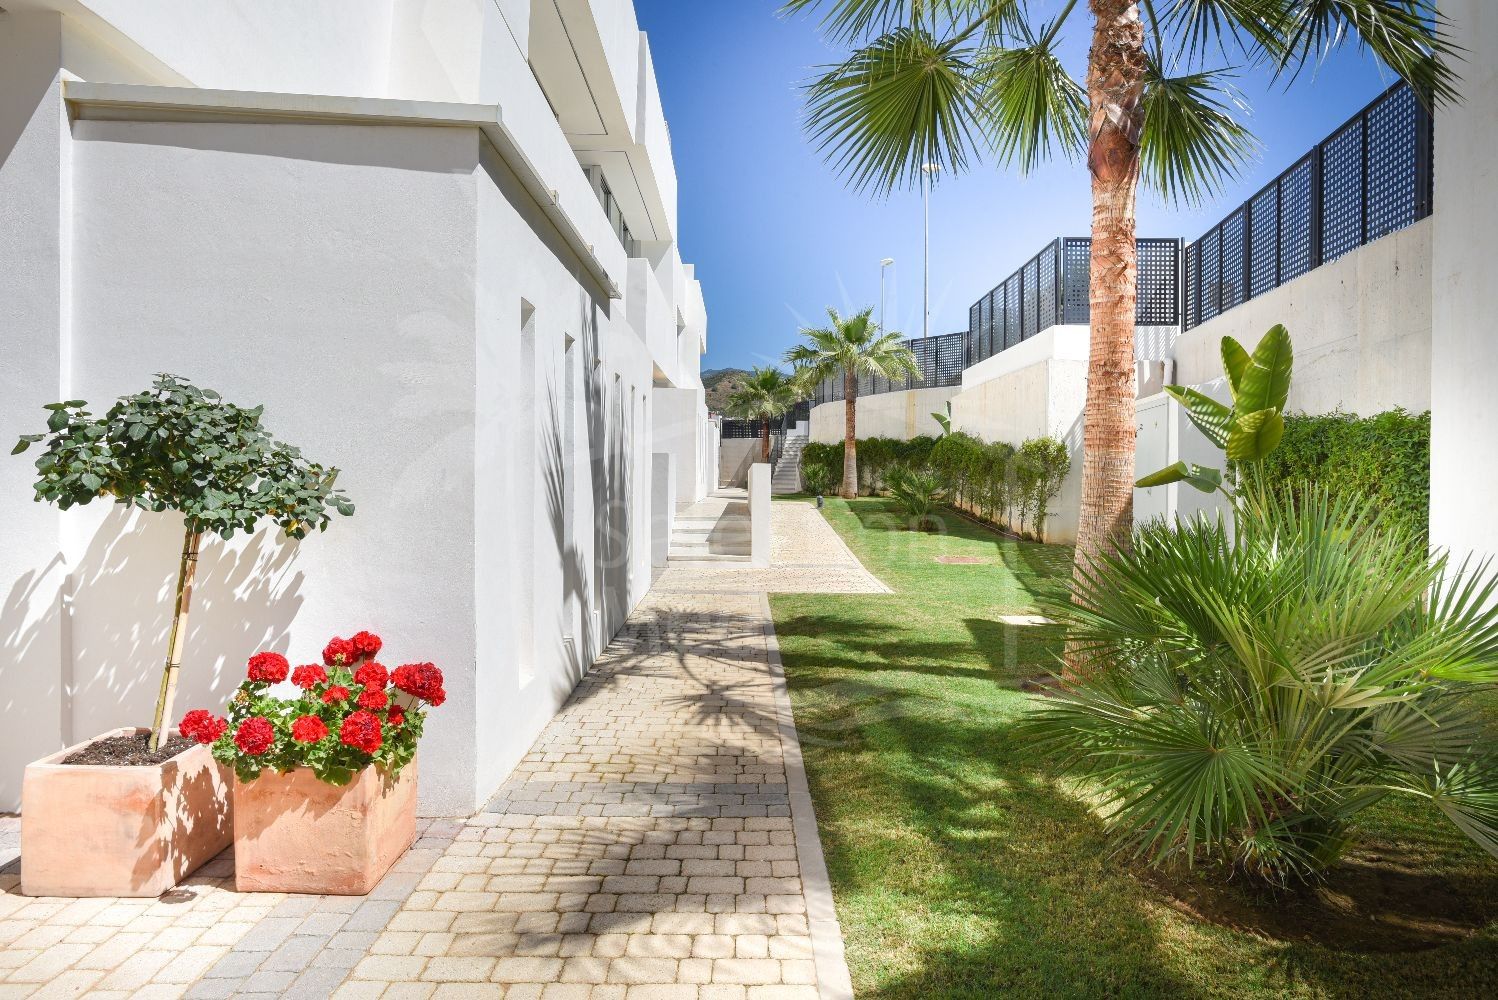 Opportunity, lovely and new townhouse close to Marbella and the beach